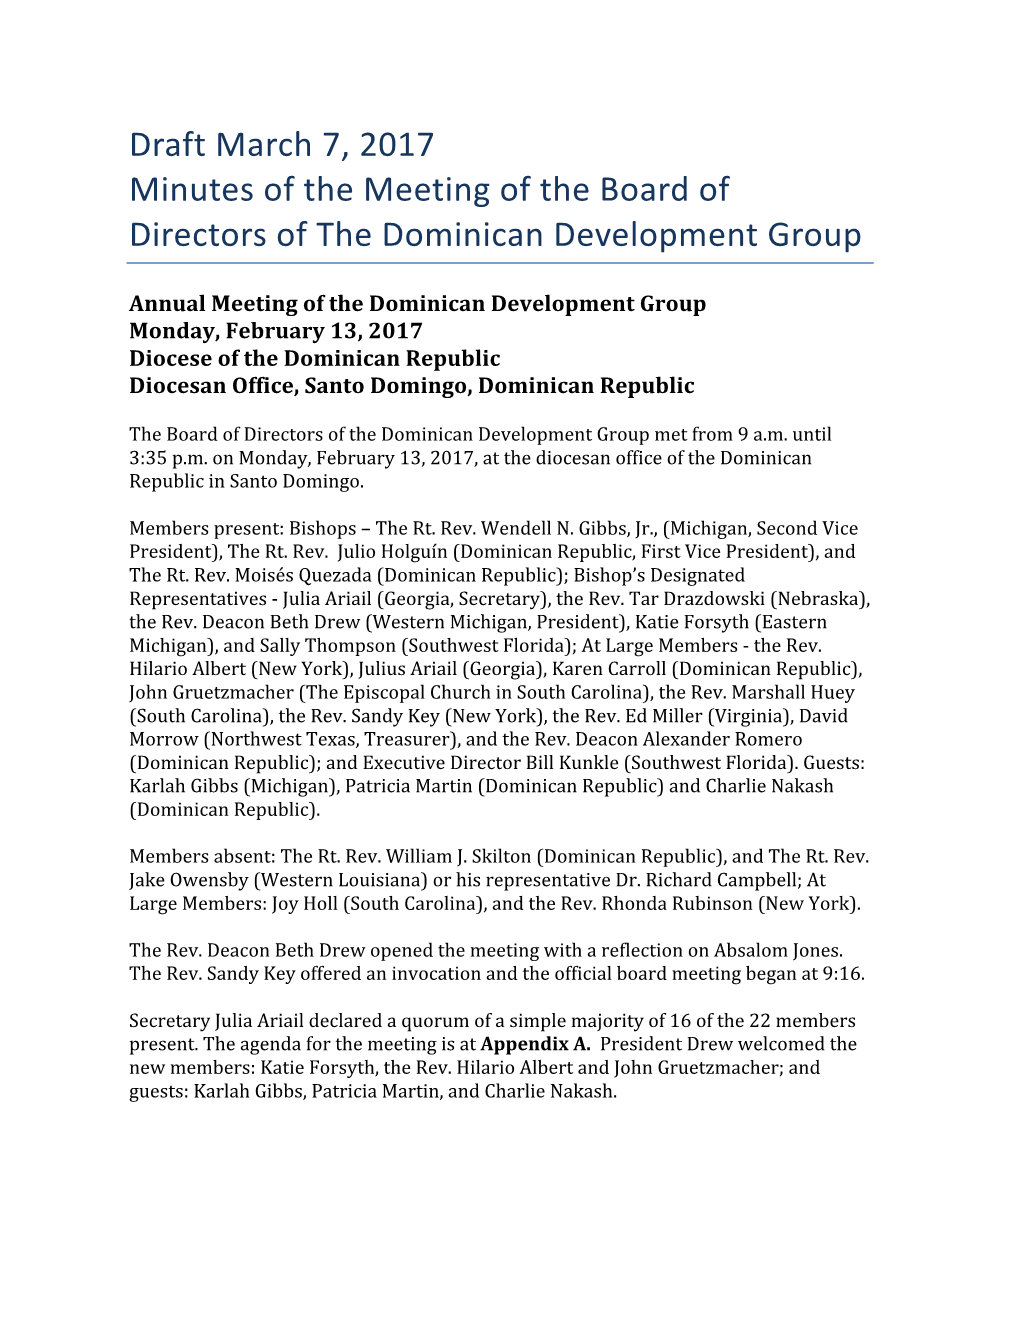 Draft March 7, 2017 Minutes of the Meeting of the Board of Directors of the Dominican Development Group